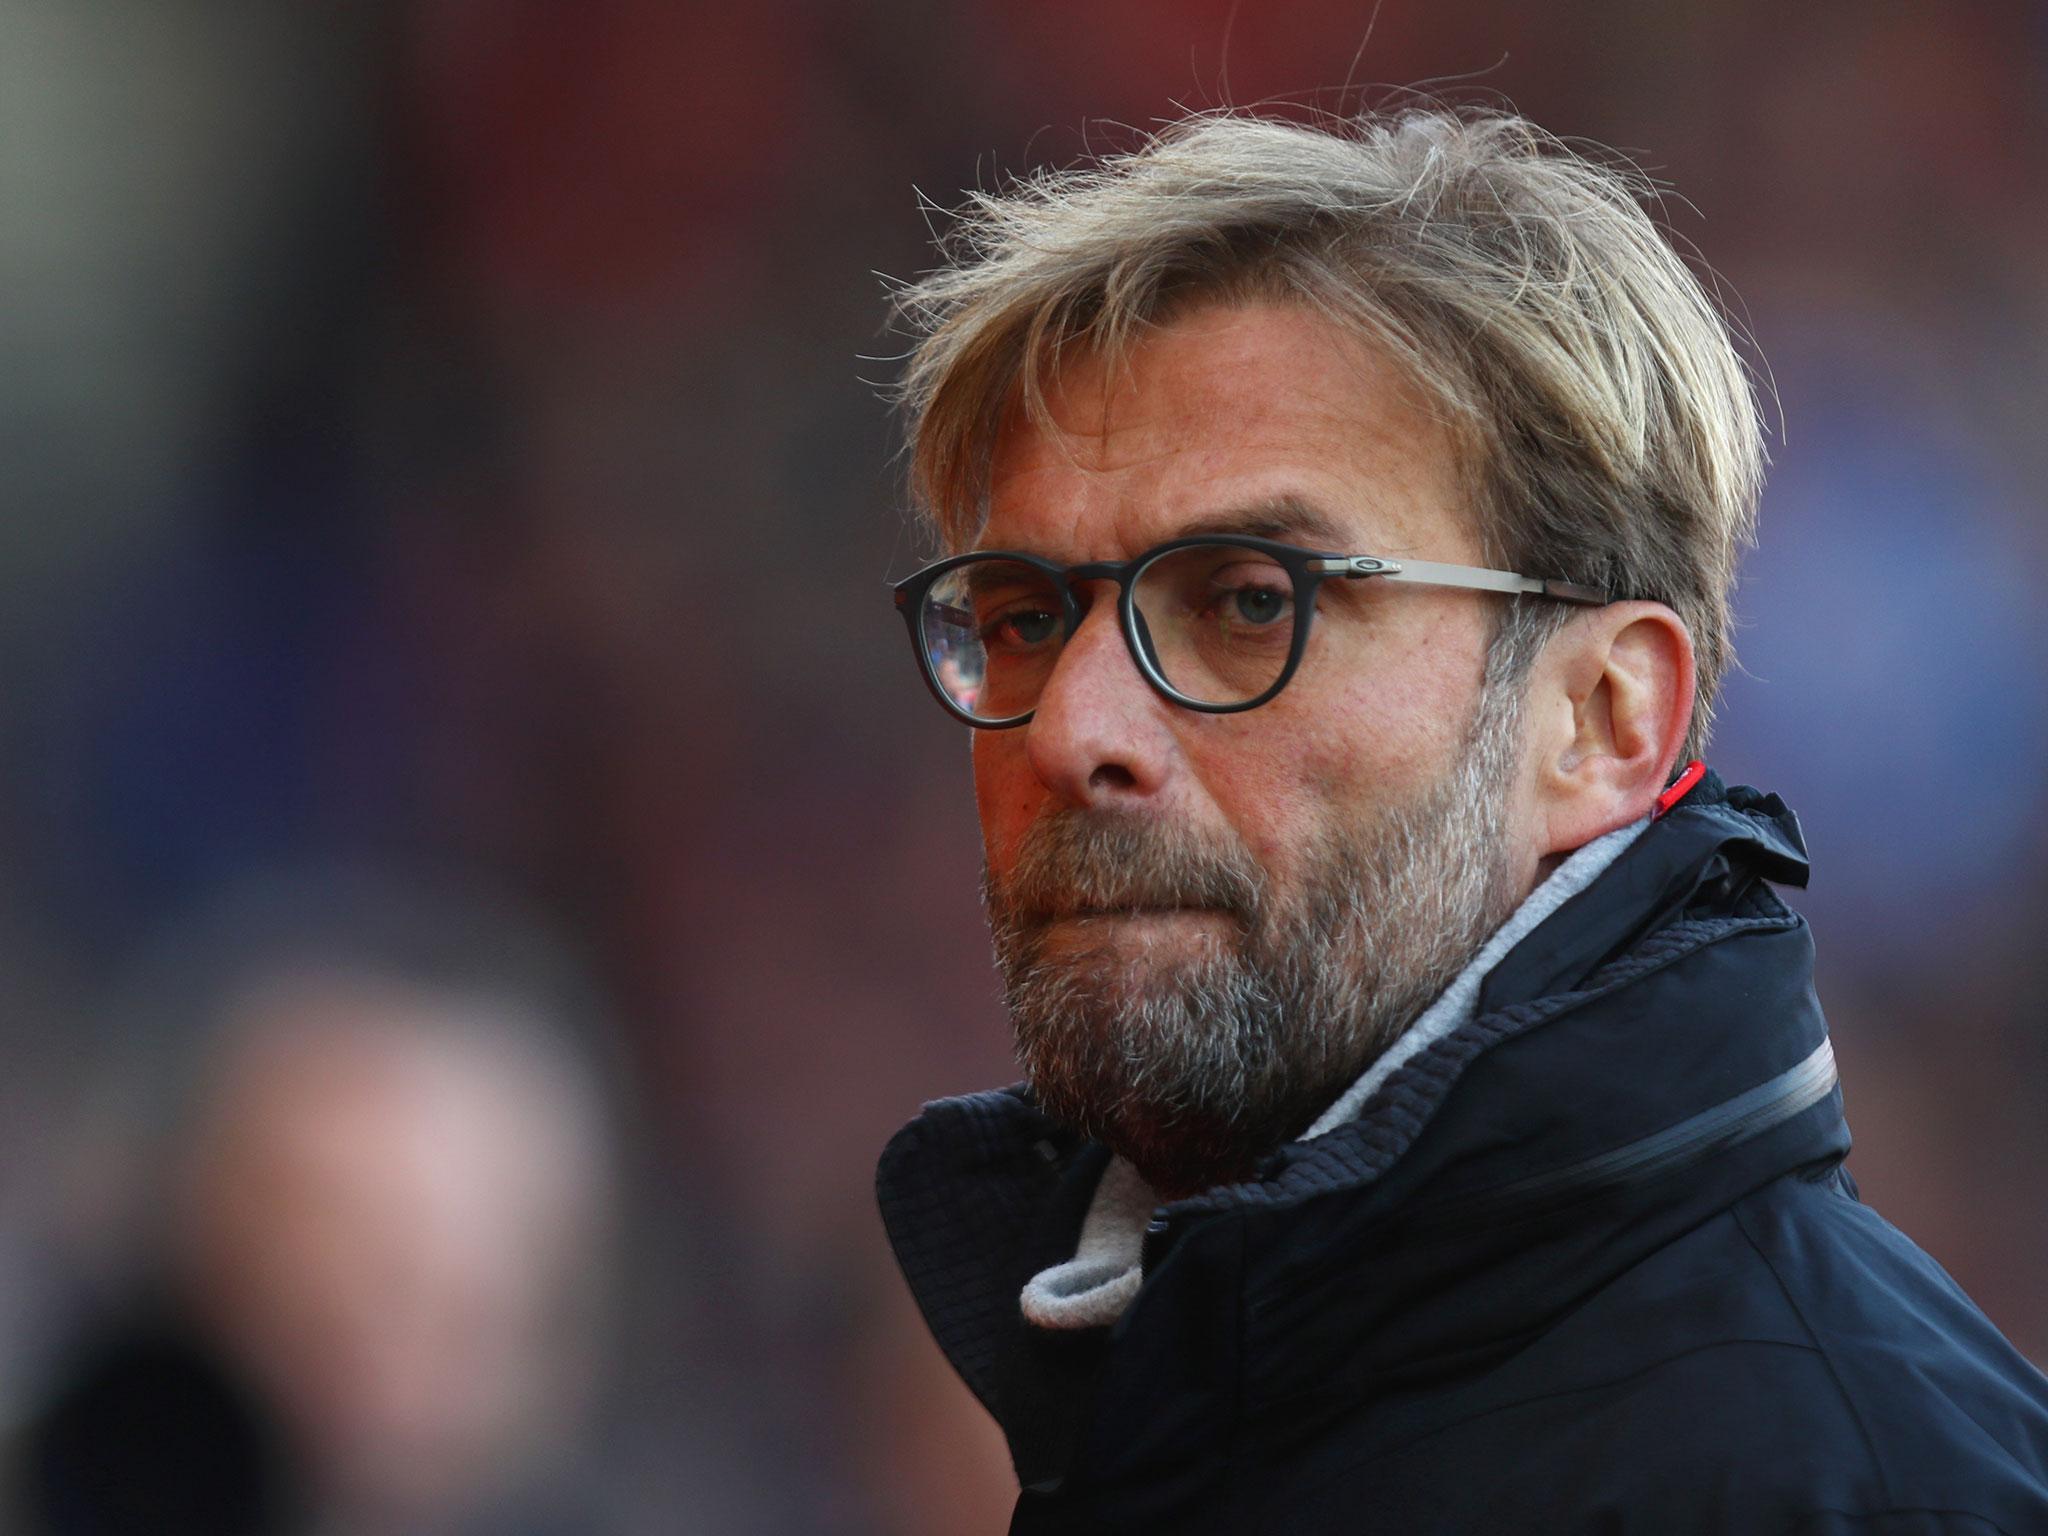 Klopp was his usual animated self on the sideline as he barked orders at the Liverpool players